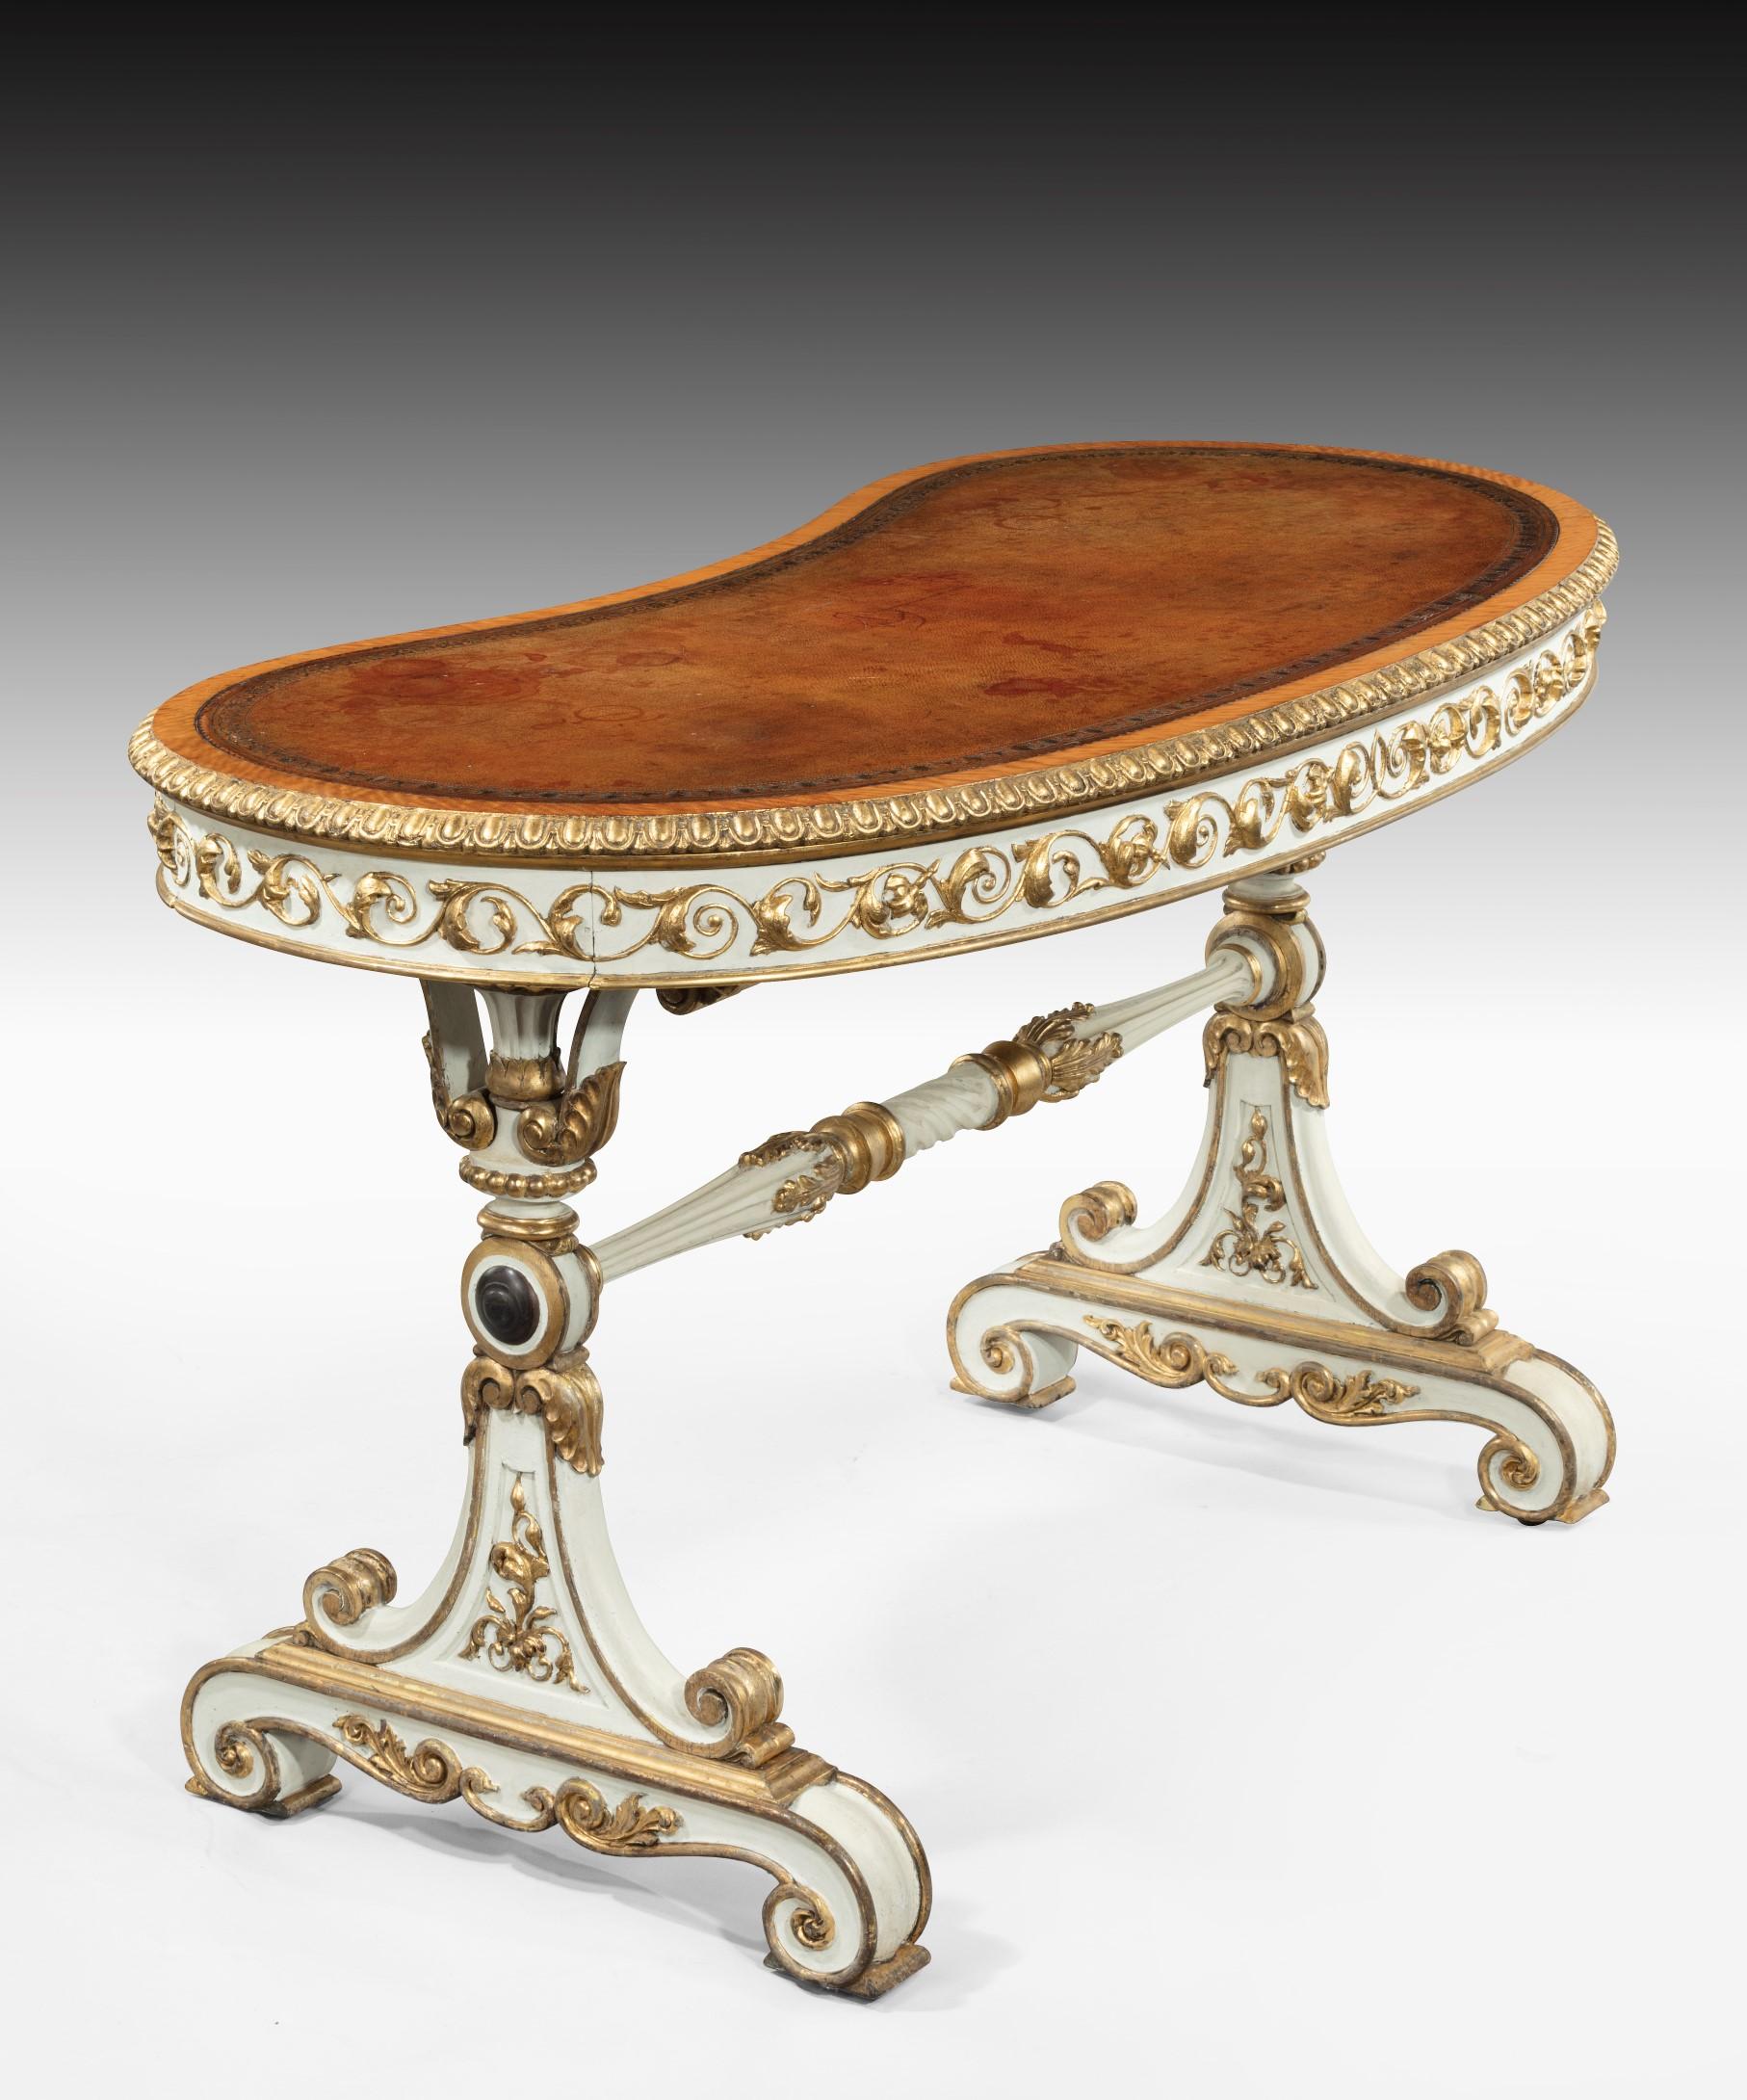 Wood William IV Kidney Shaped Writing Table with Carved Giltwood and White Painted For Sale